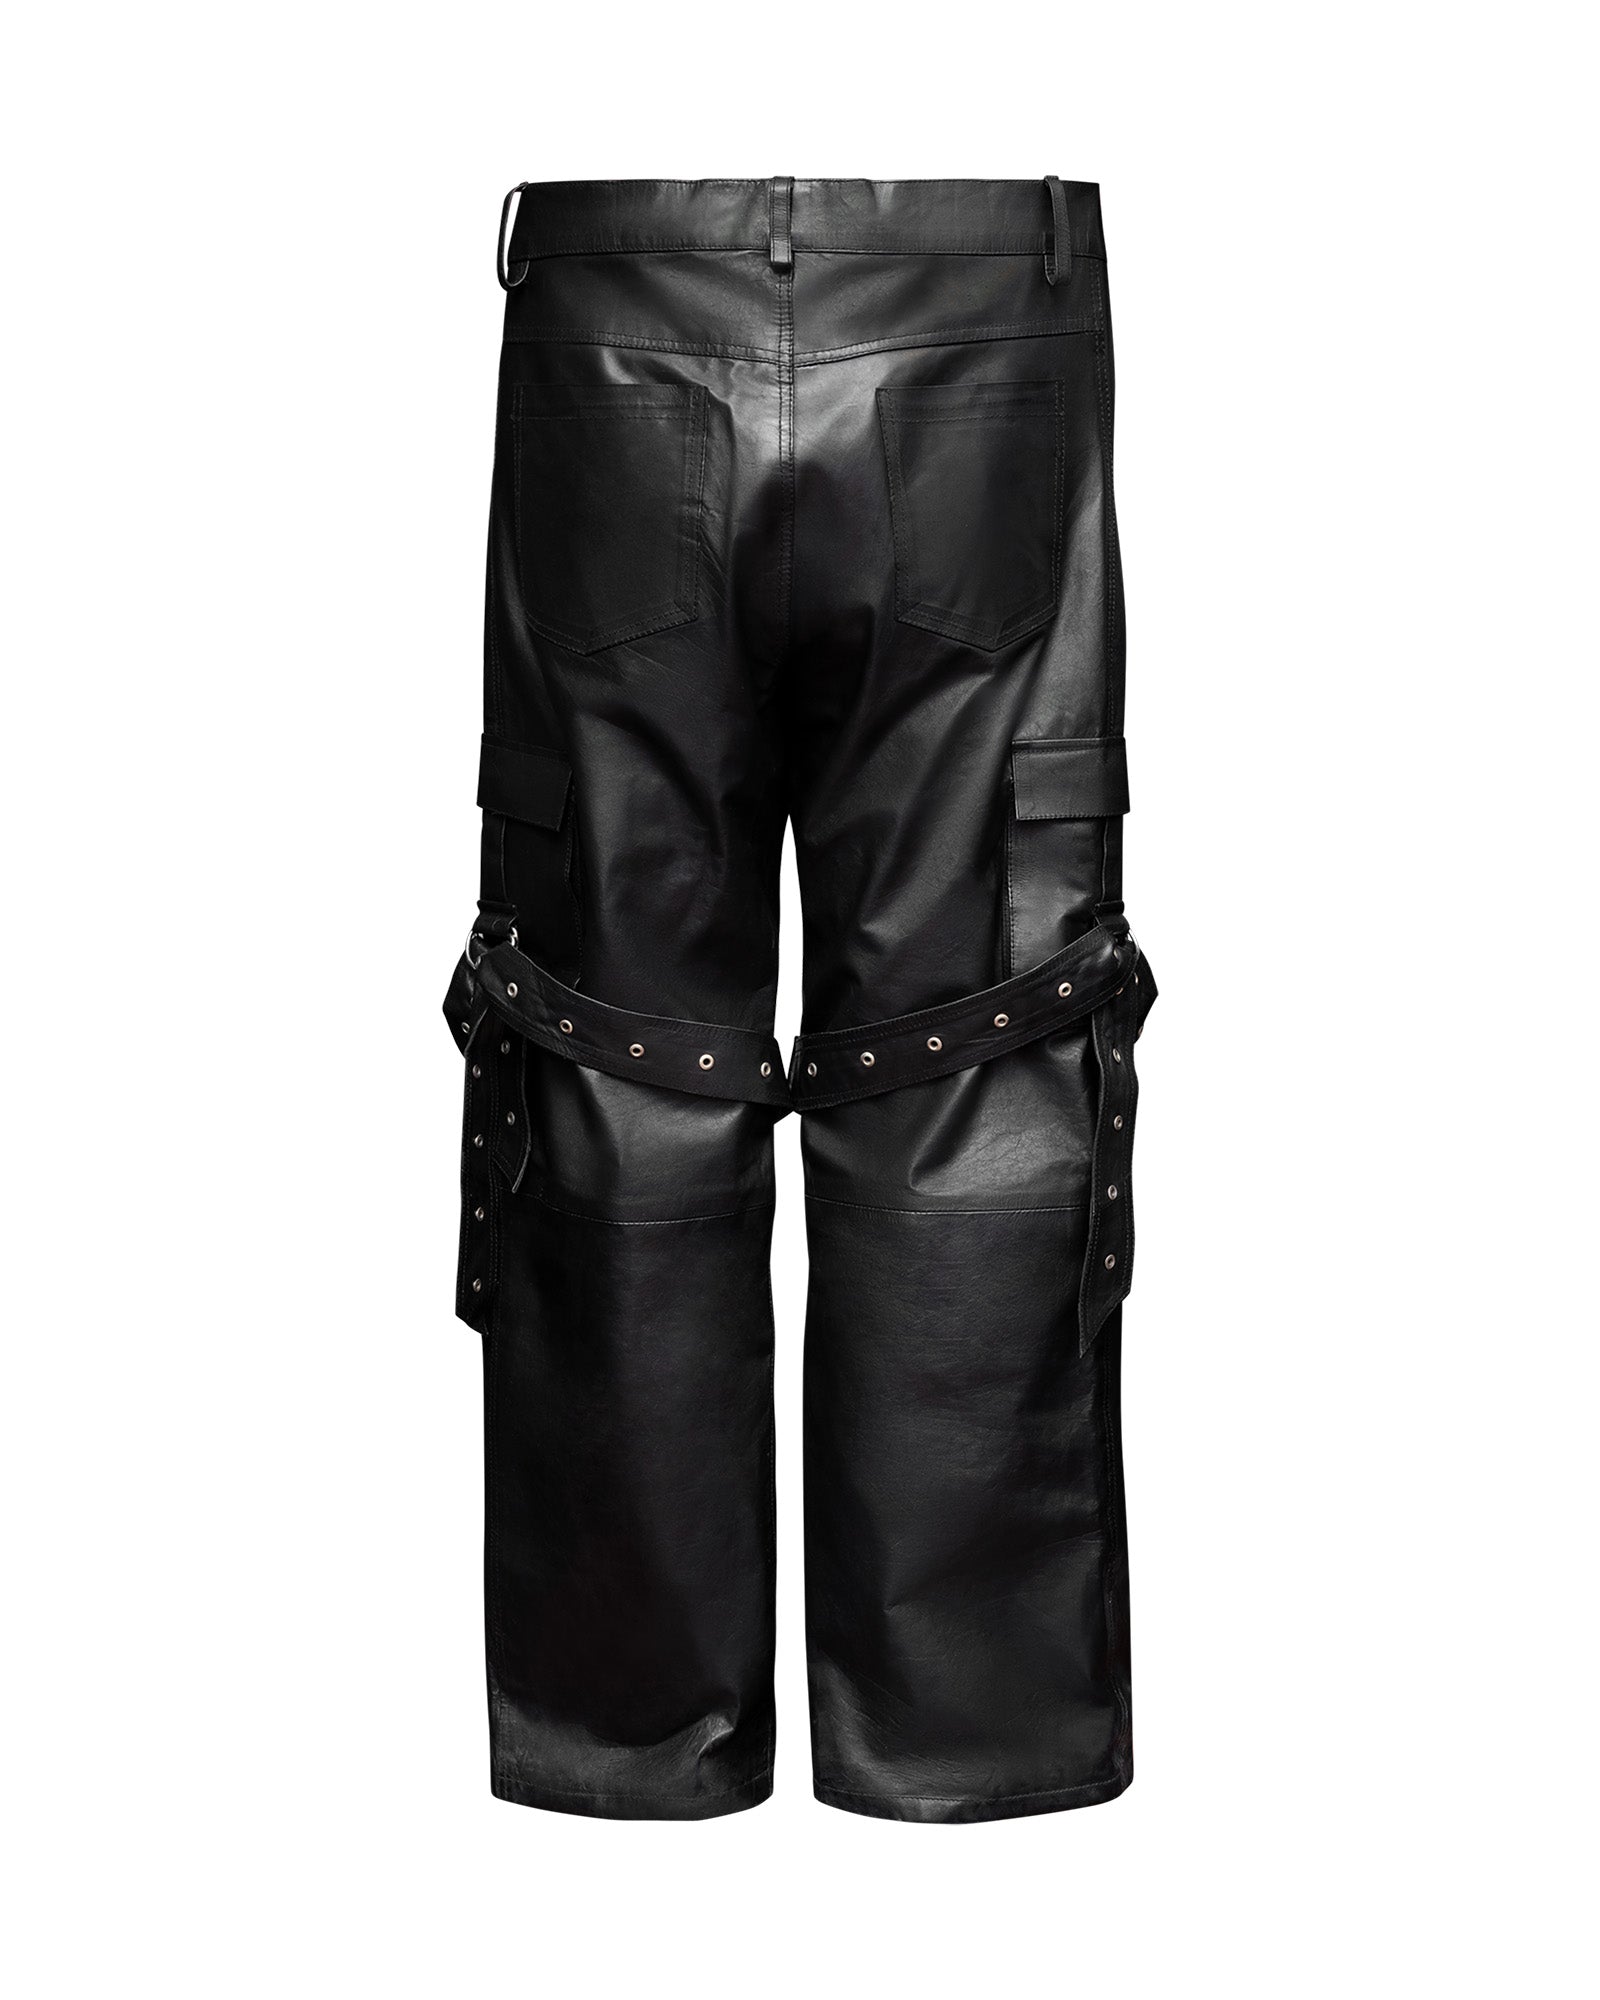 BOMBER REVERIE NAPPA LEATHER CARGO PANTS